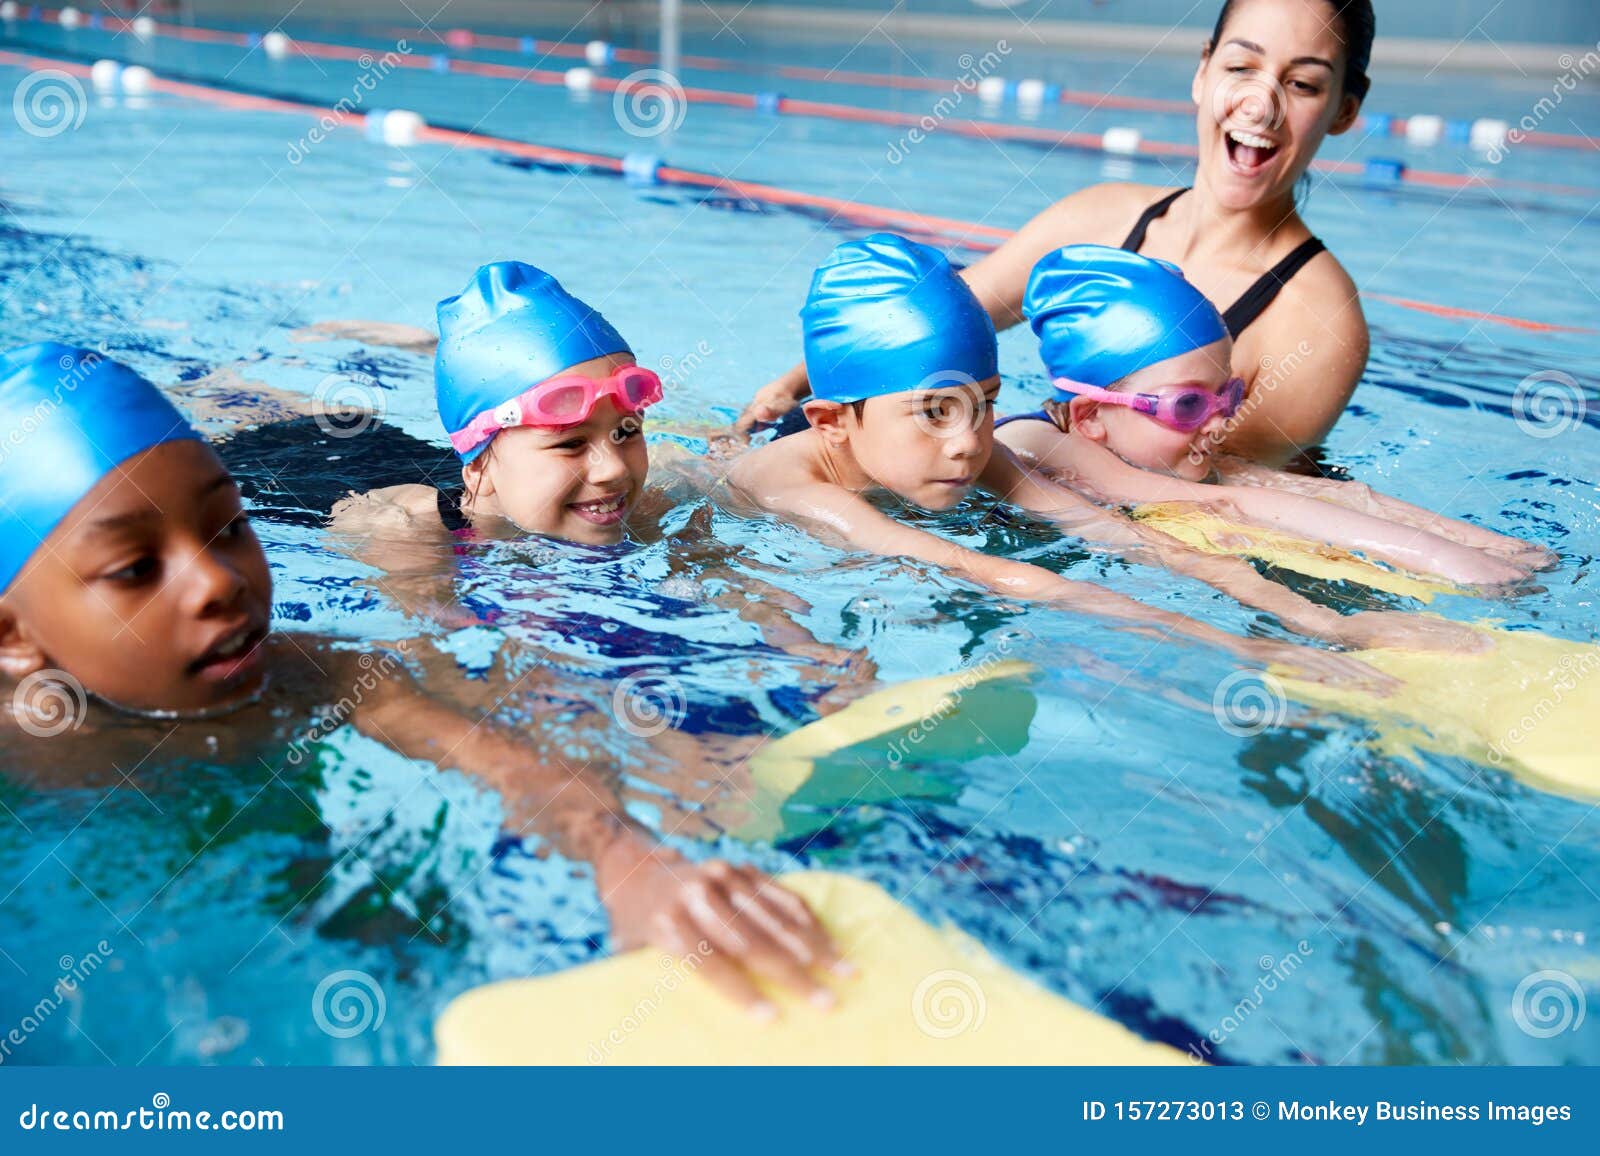 female coach in water giving group of children swimming lesson in indoor pool